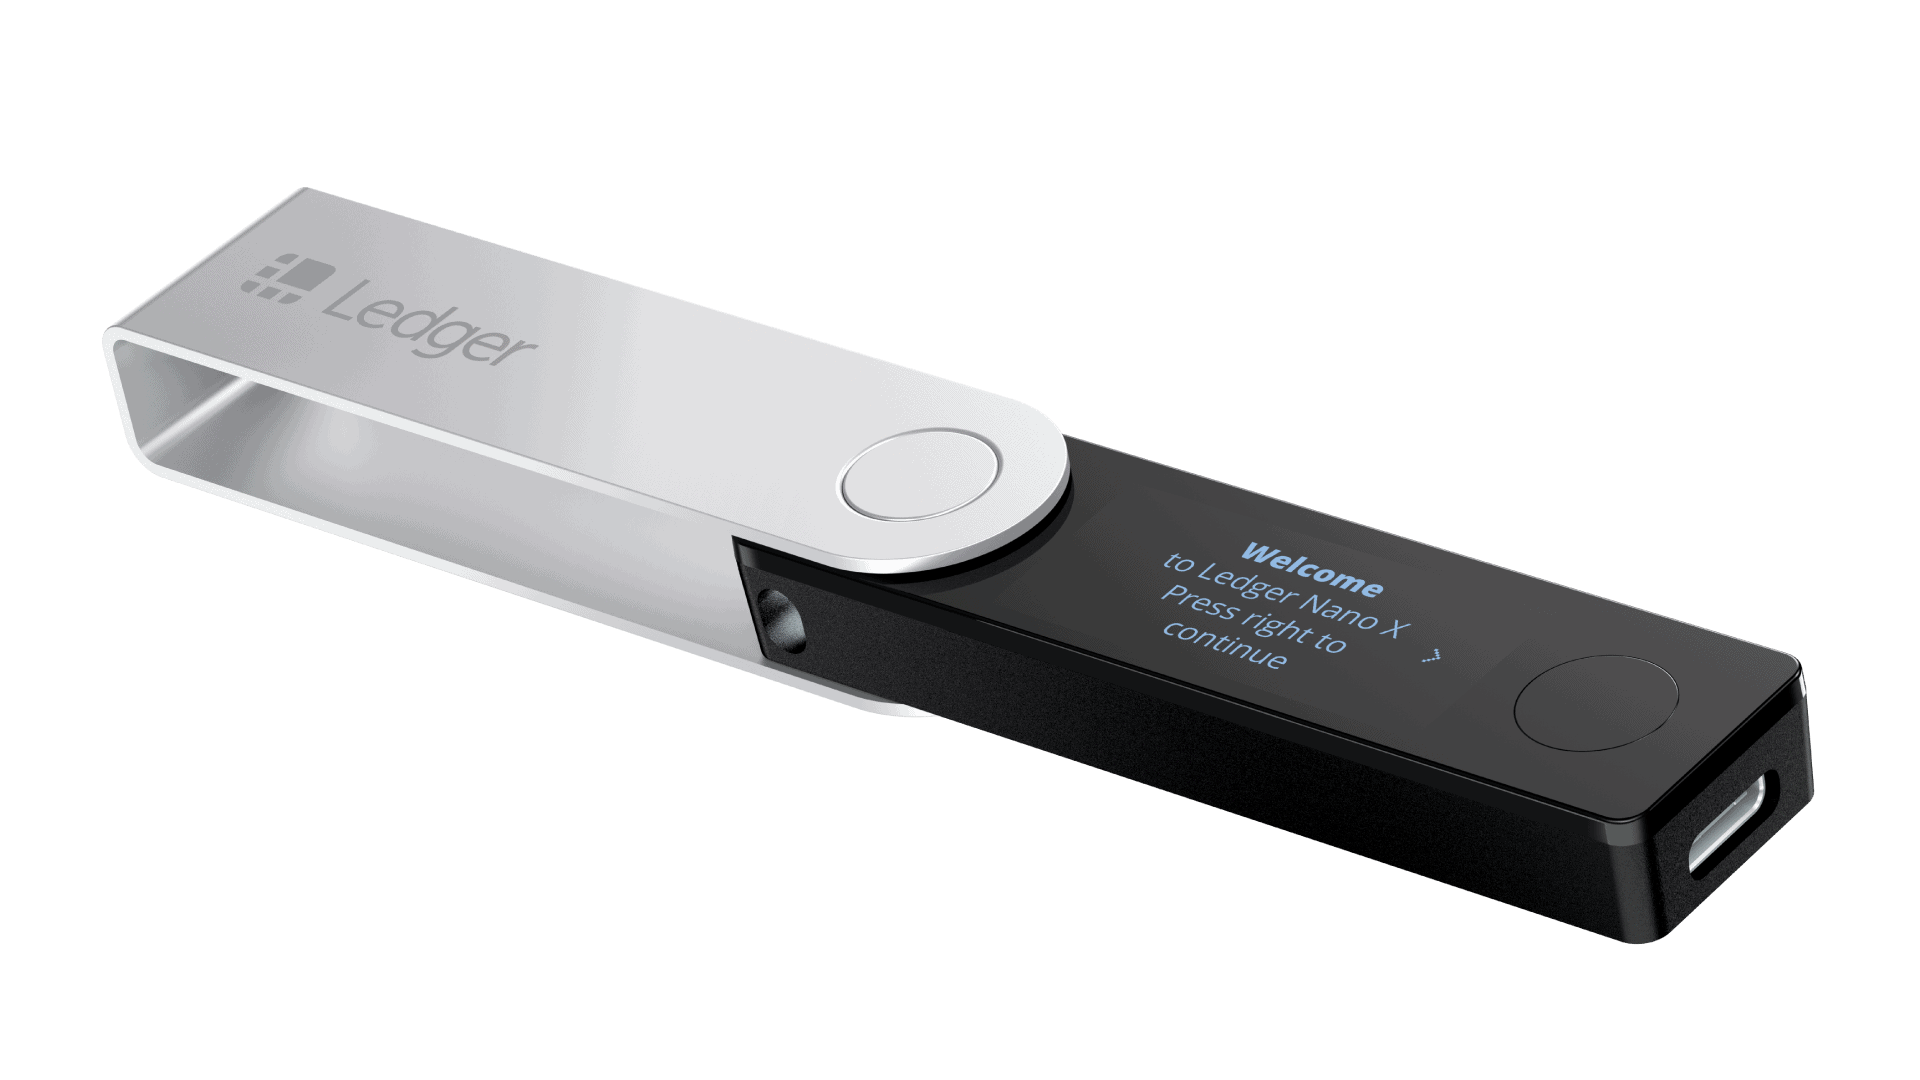 A picture of the Ledger Nano X hardware wallet.